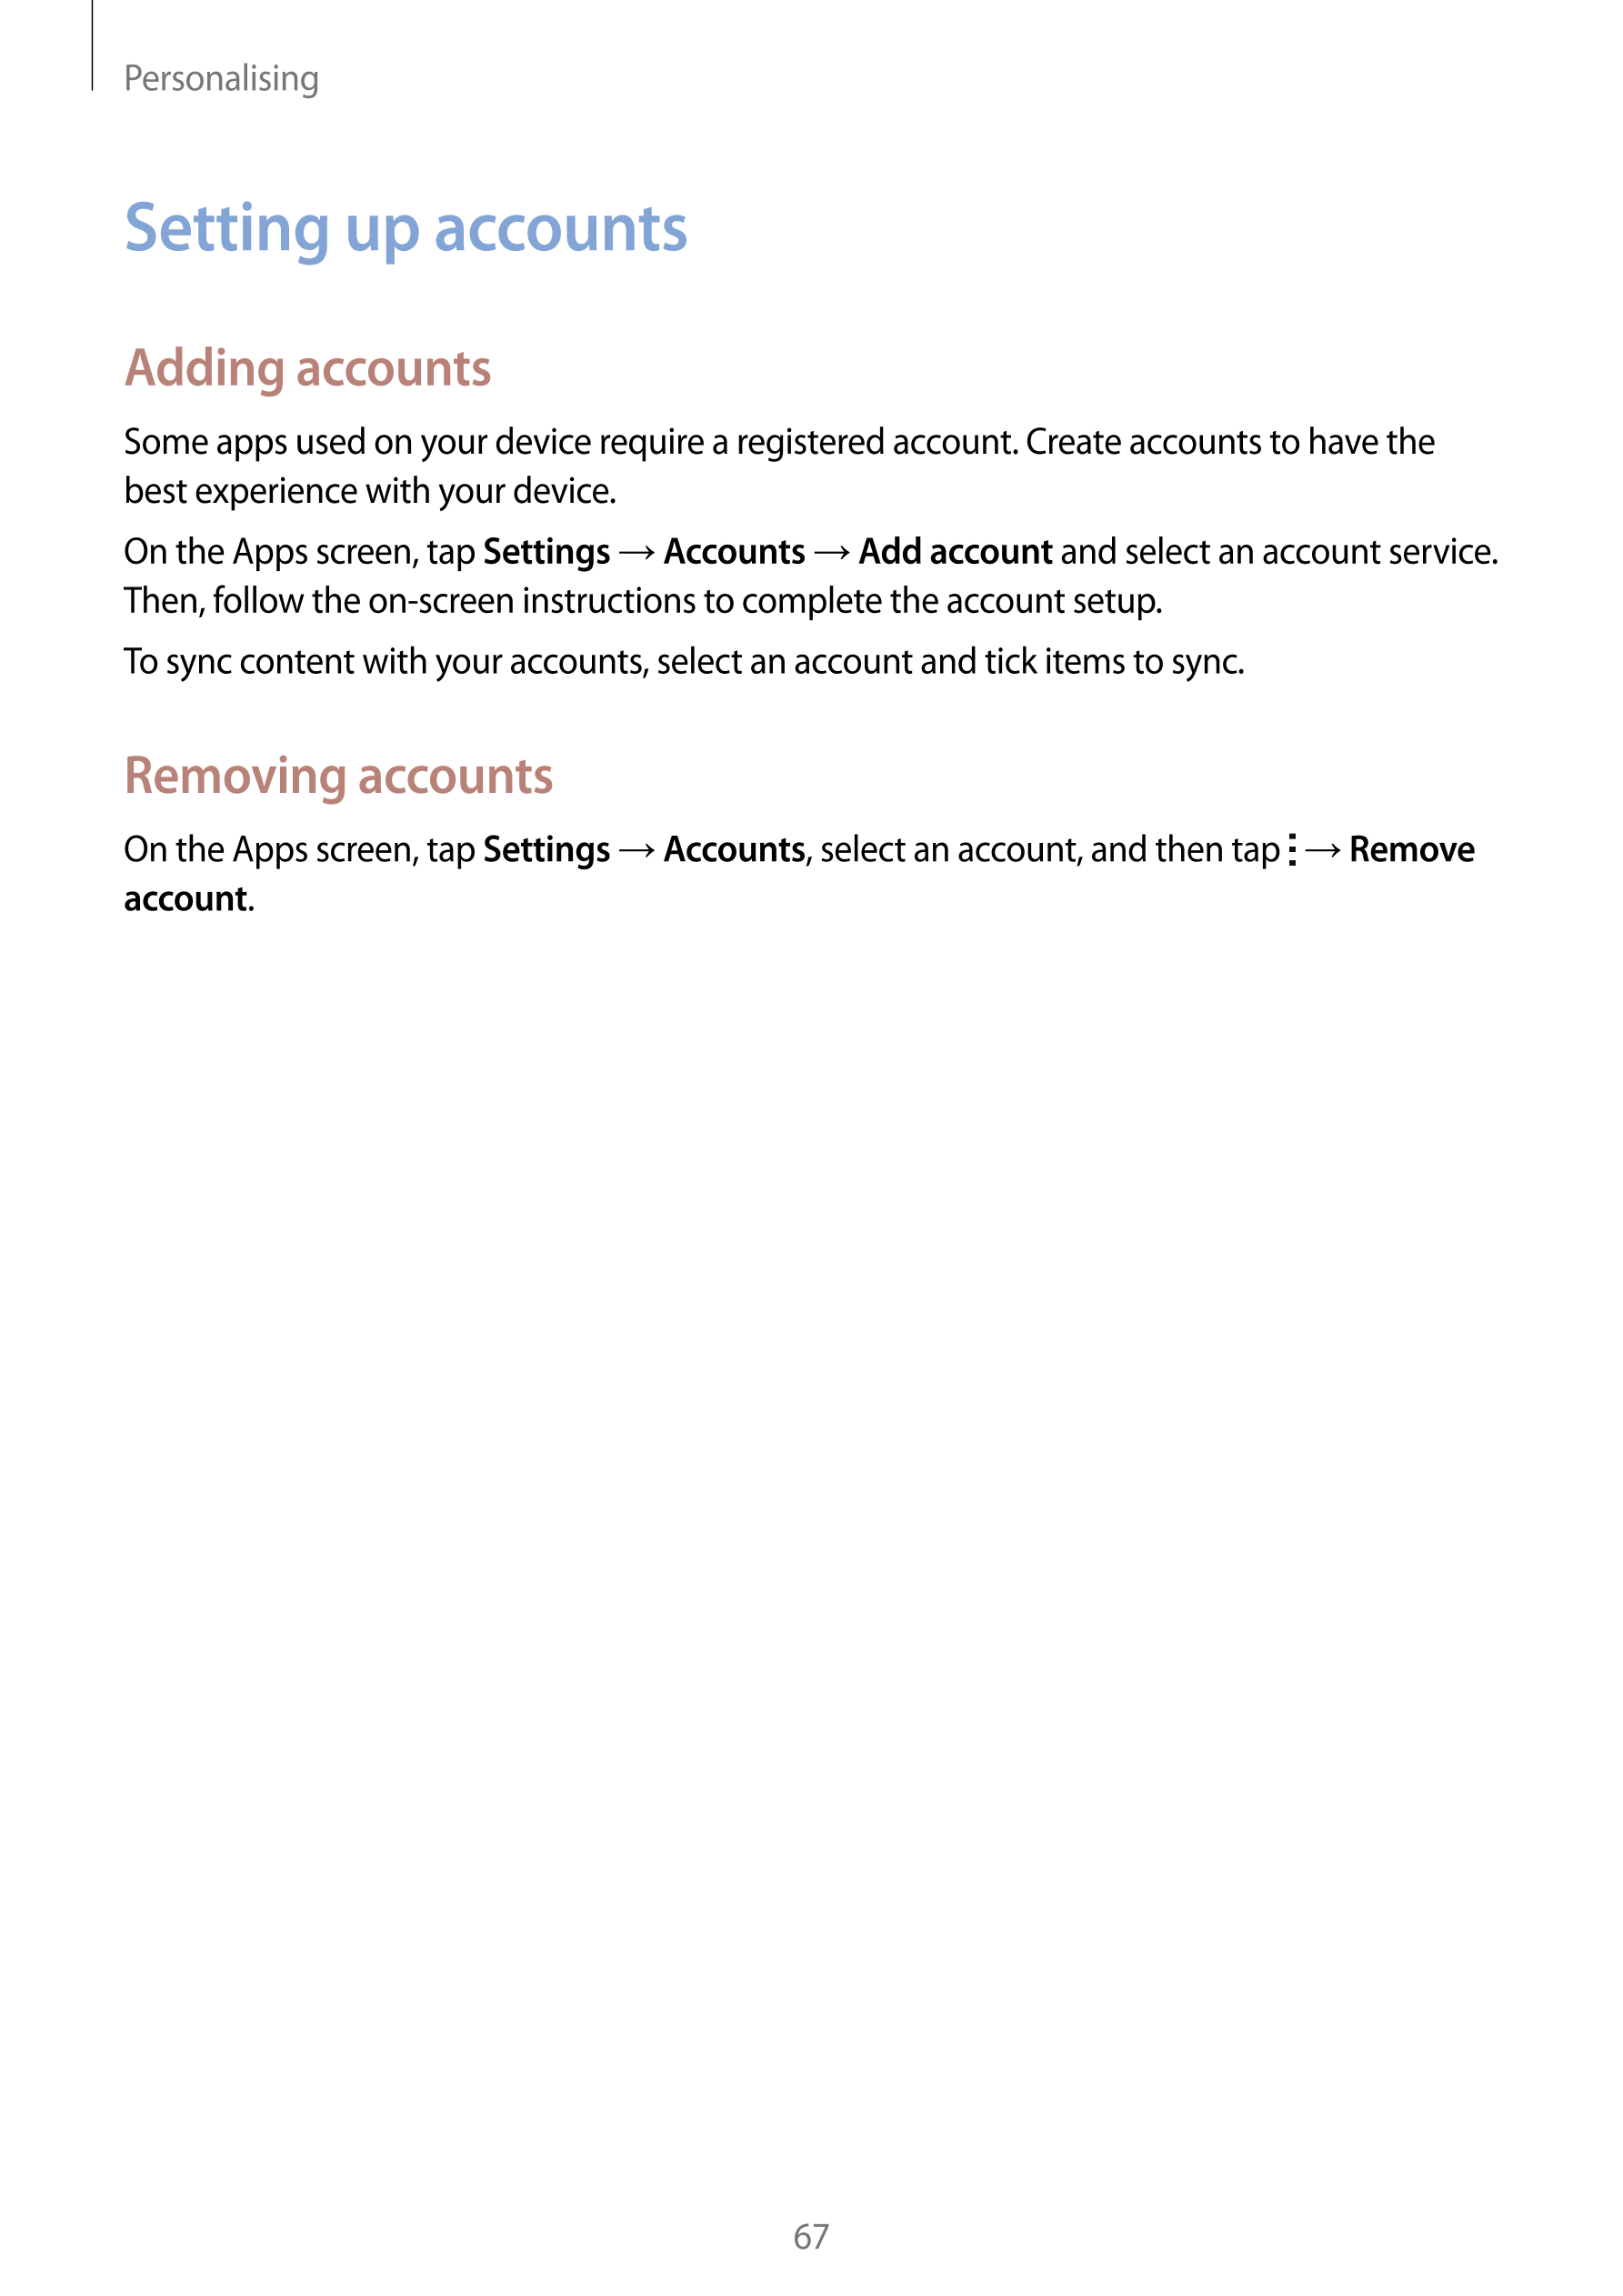 Personalising
Setting up accounts
Adding accounts
Some apps used on your device require a registered account. Create accounts to